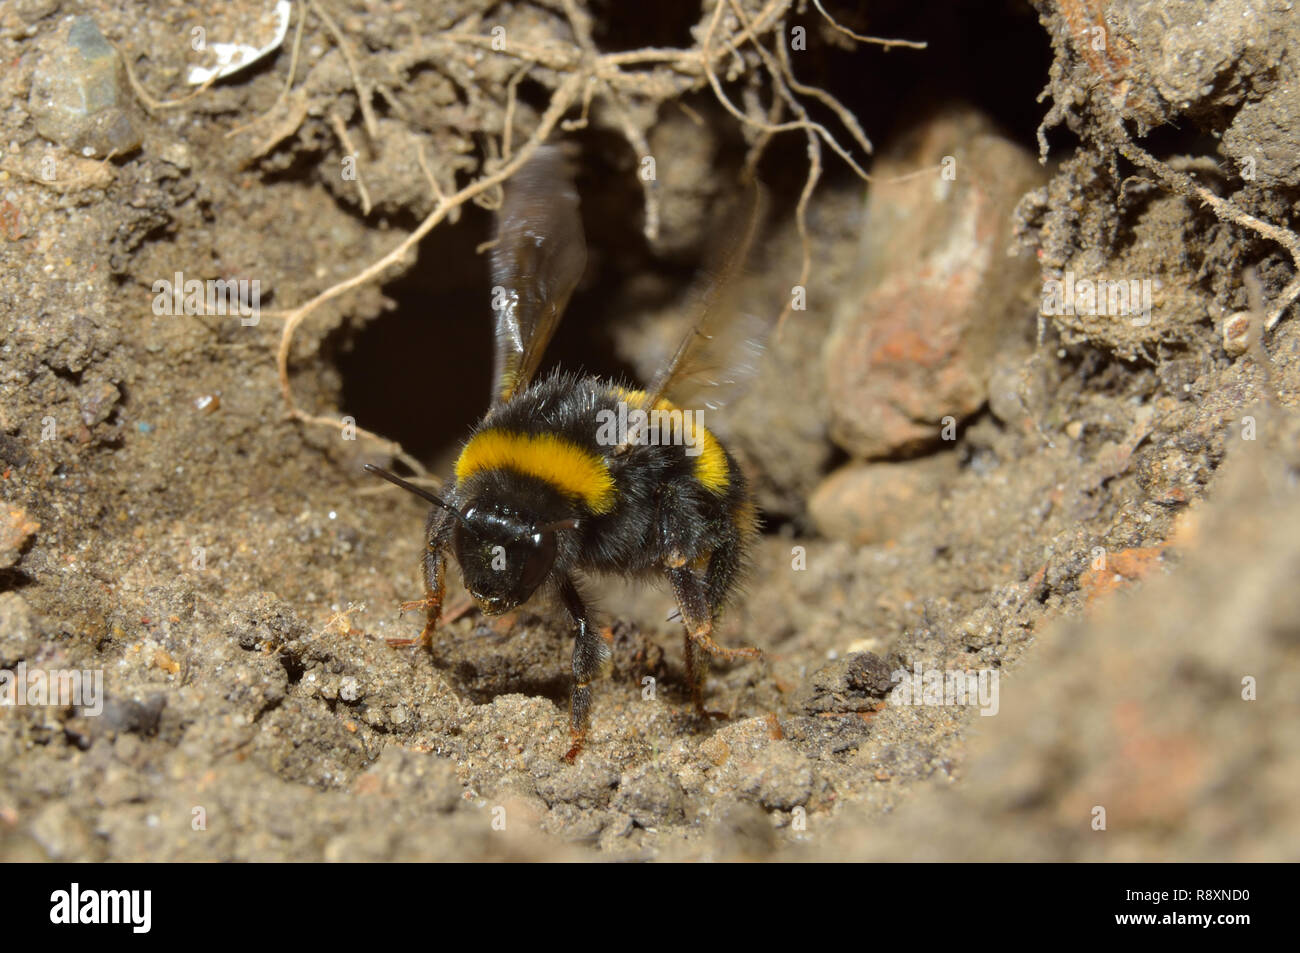 Bumblebee in flight, in and out of dirt burrow. Stock Photo